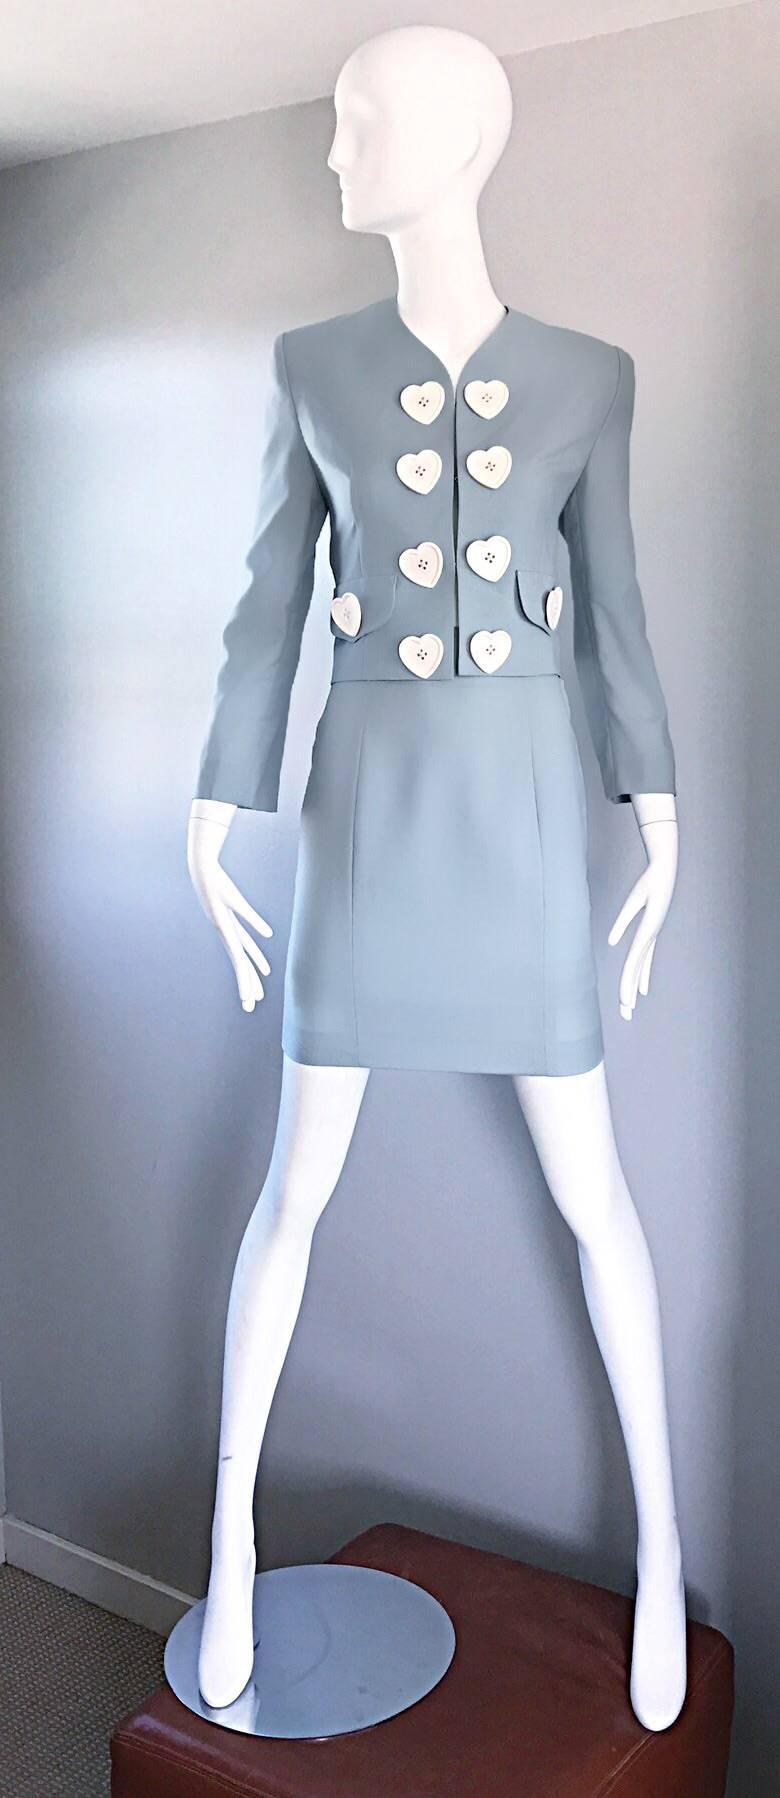 Amazing vintage 90s MOSCHINO Cheap & Chic light blue skirt suit! Wonderful tailored fit, with a high waisted pencil skirt and 1960s style jacket! Oversized white heart plastic buttons adorn the front of the blazer. Hook-and-eye closures up the